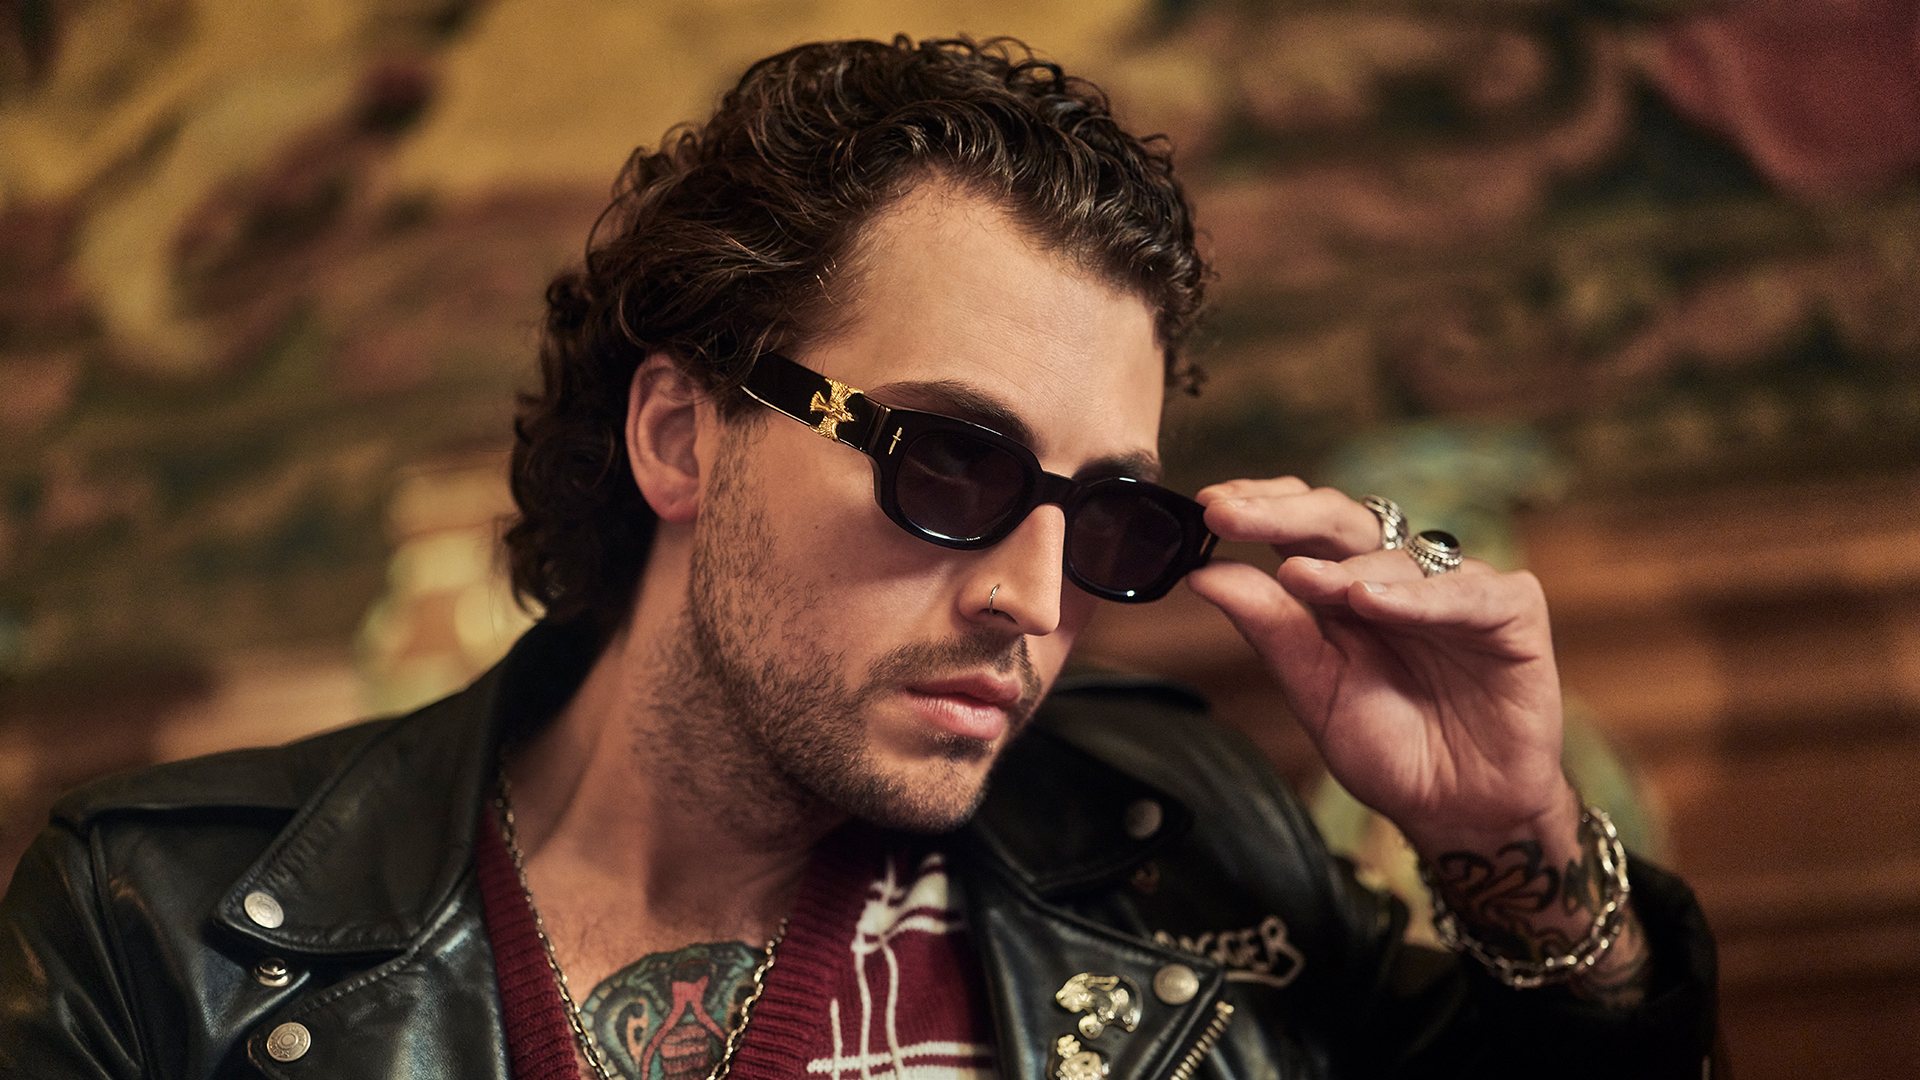 Explore the Limited Edition Cutler and Gross X The Great Frog sunglasses now